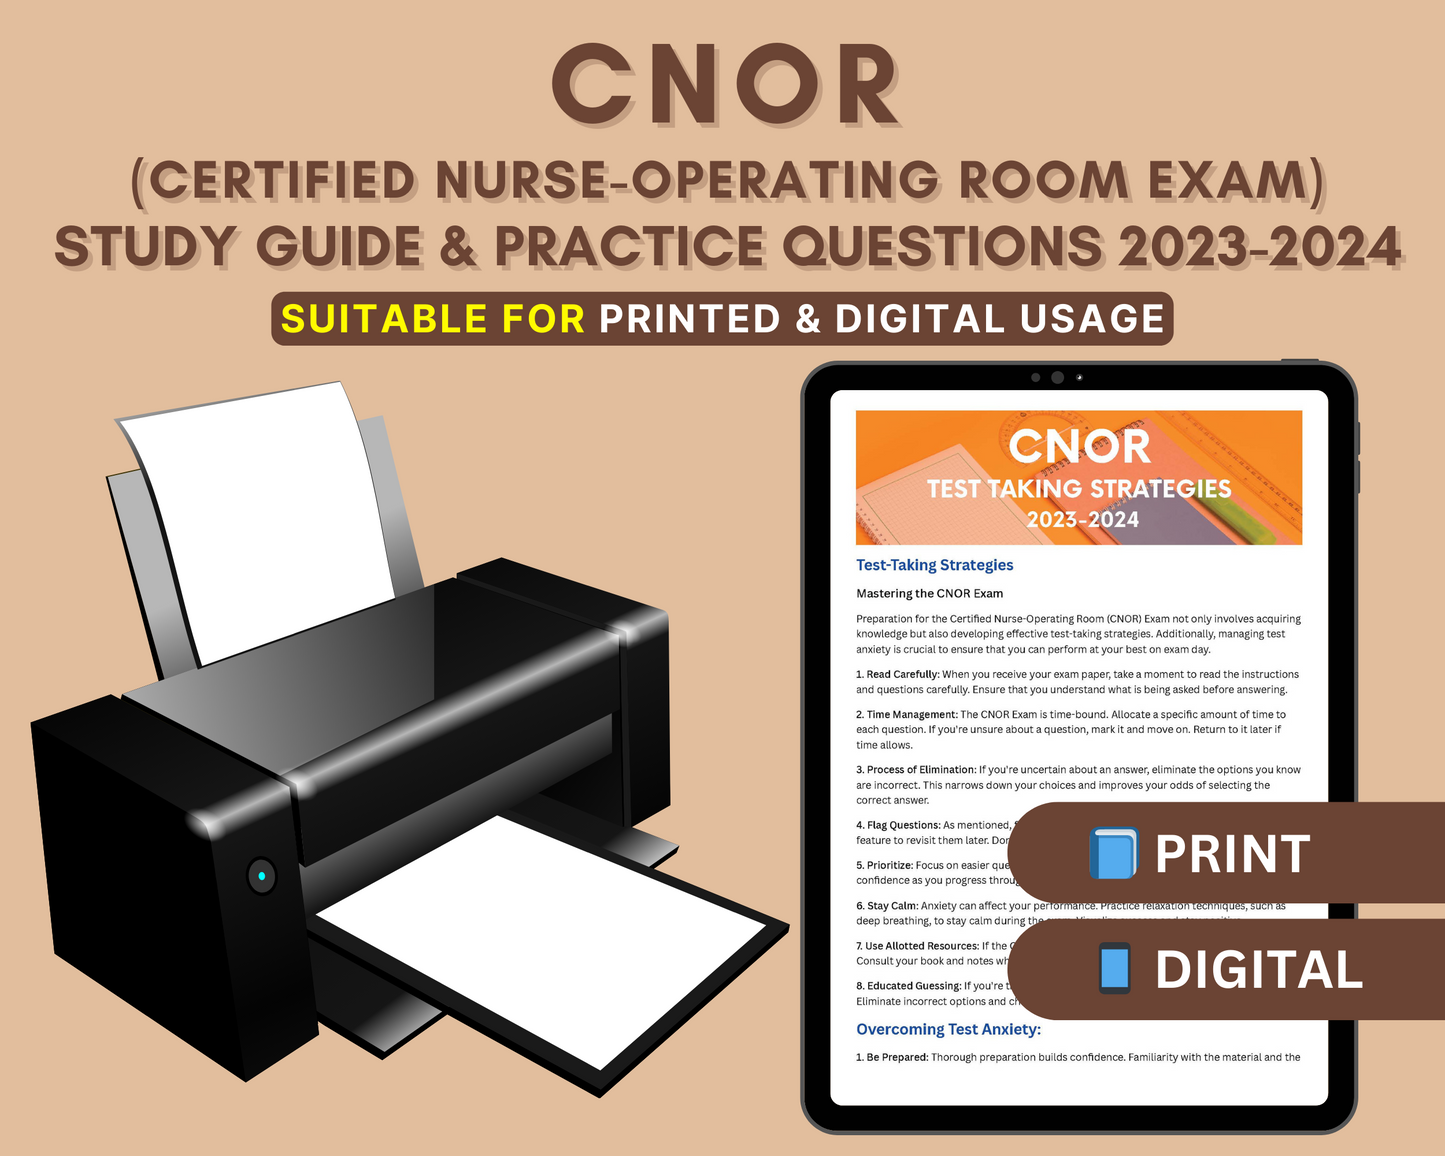 CNOR Study Guide 2023-2024: Perioperative Nursing Certification Prep with In-Depth Content Review, and Practice Tests